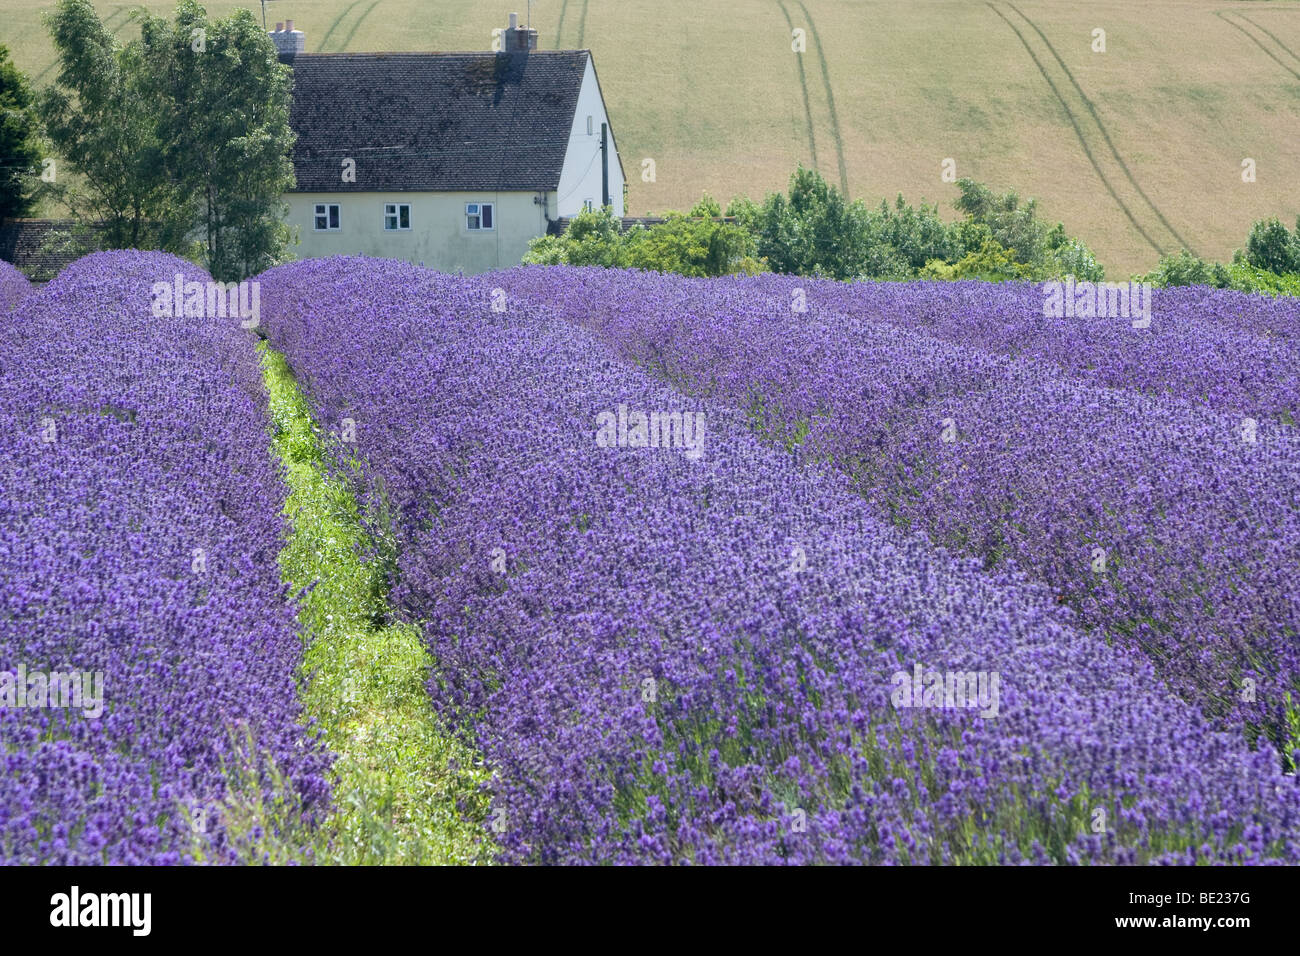 Lavender Fields in Snowshill, Gloucestershire UK Stock Photo